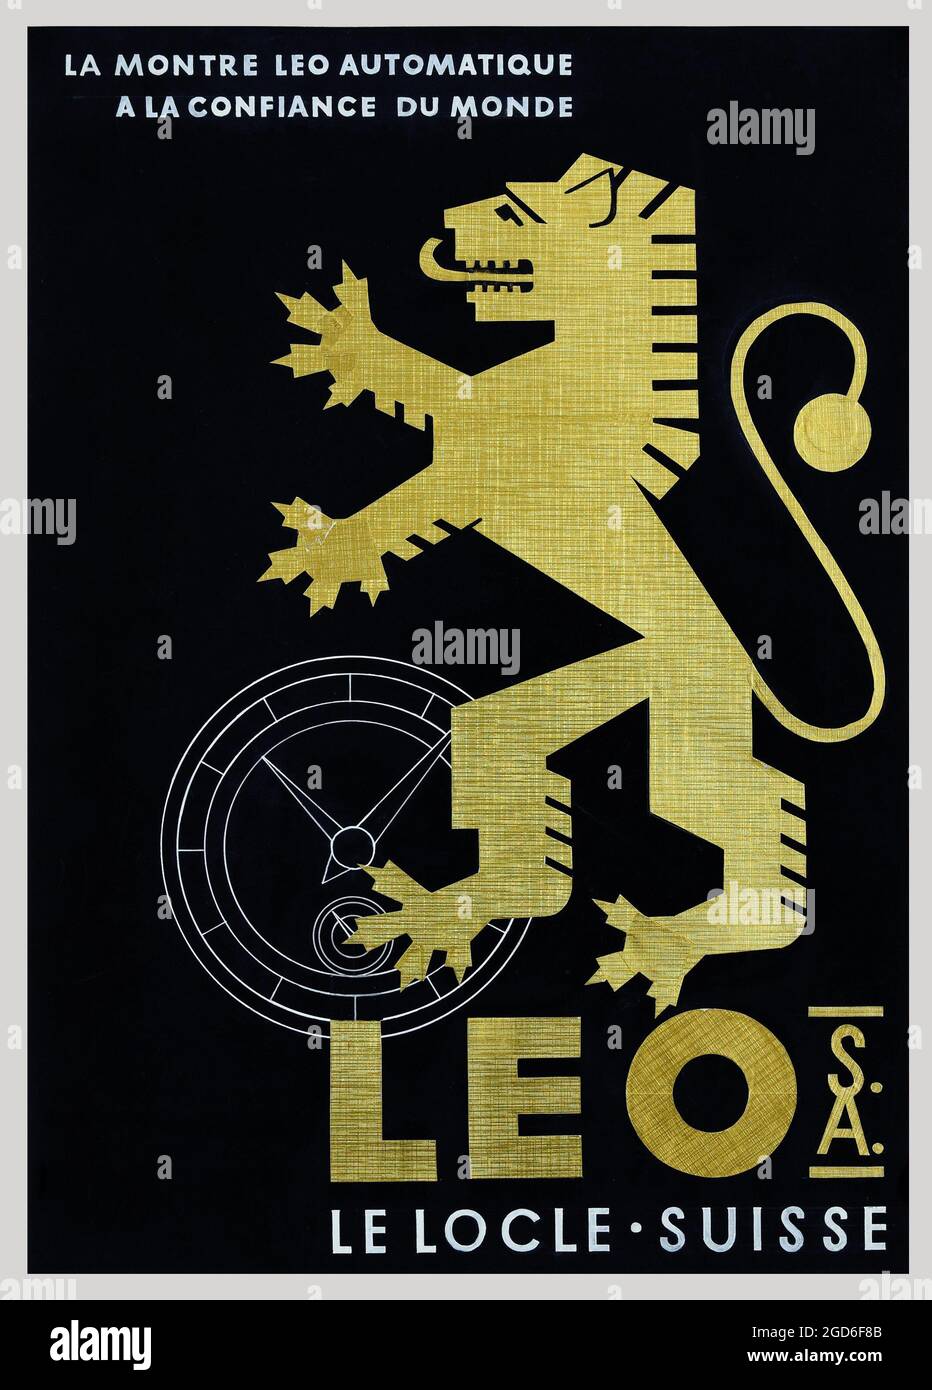 Old and vintage advertisement / poster by A. Rentschler - Leo S.A. Le Locle Suisse – 1950 Stock Photo